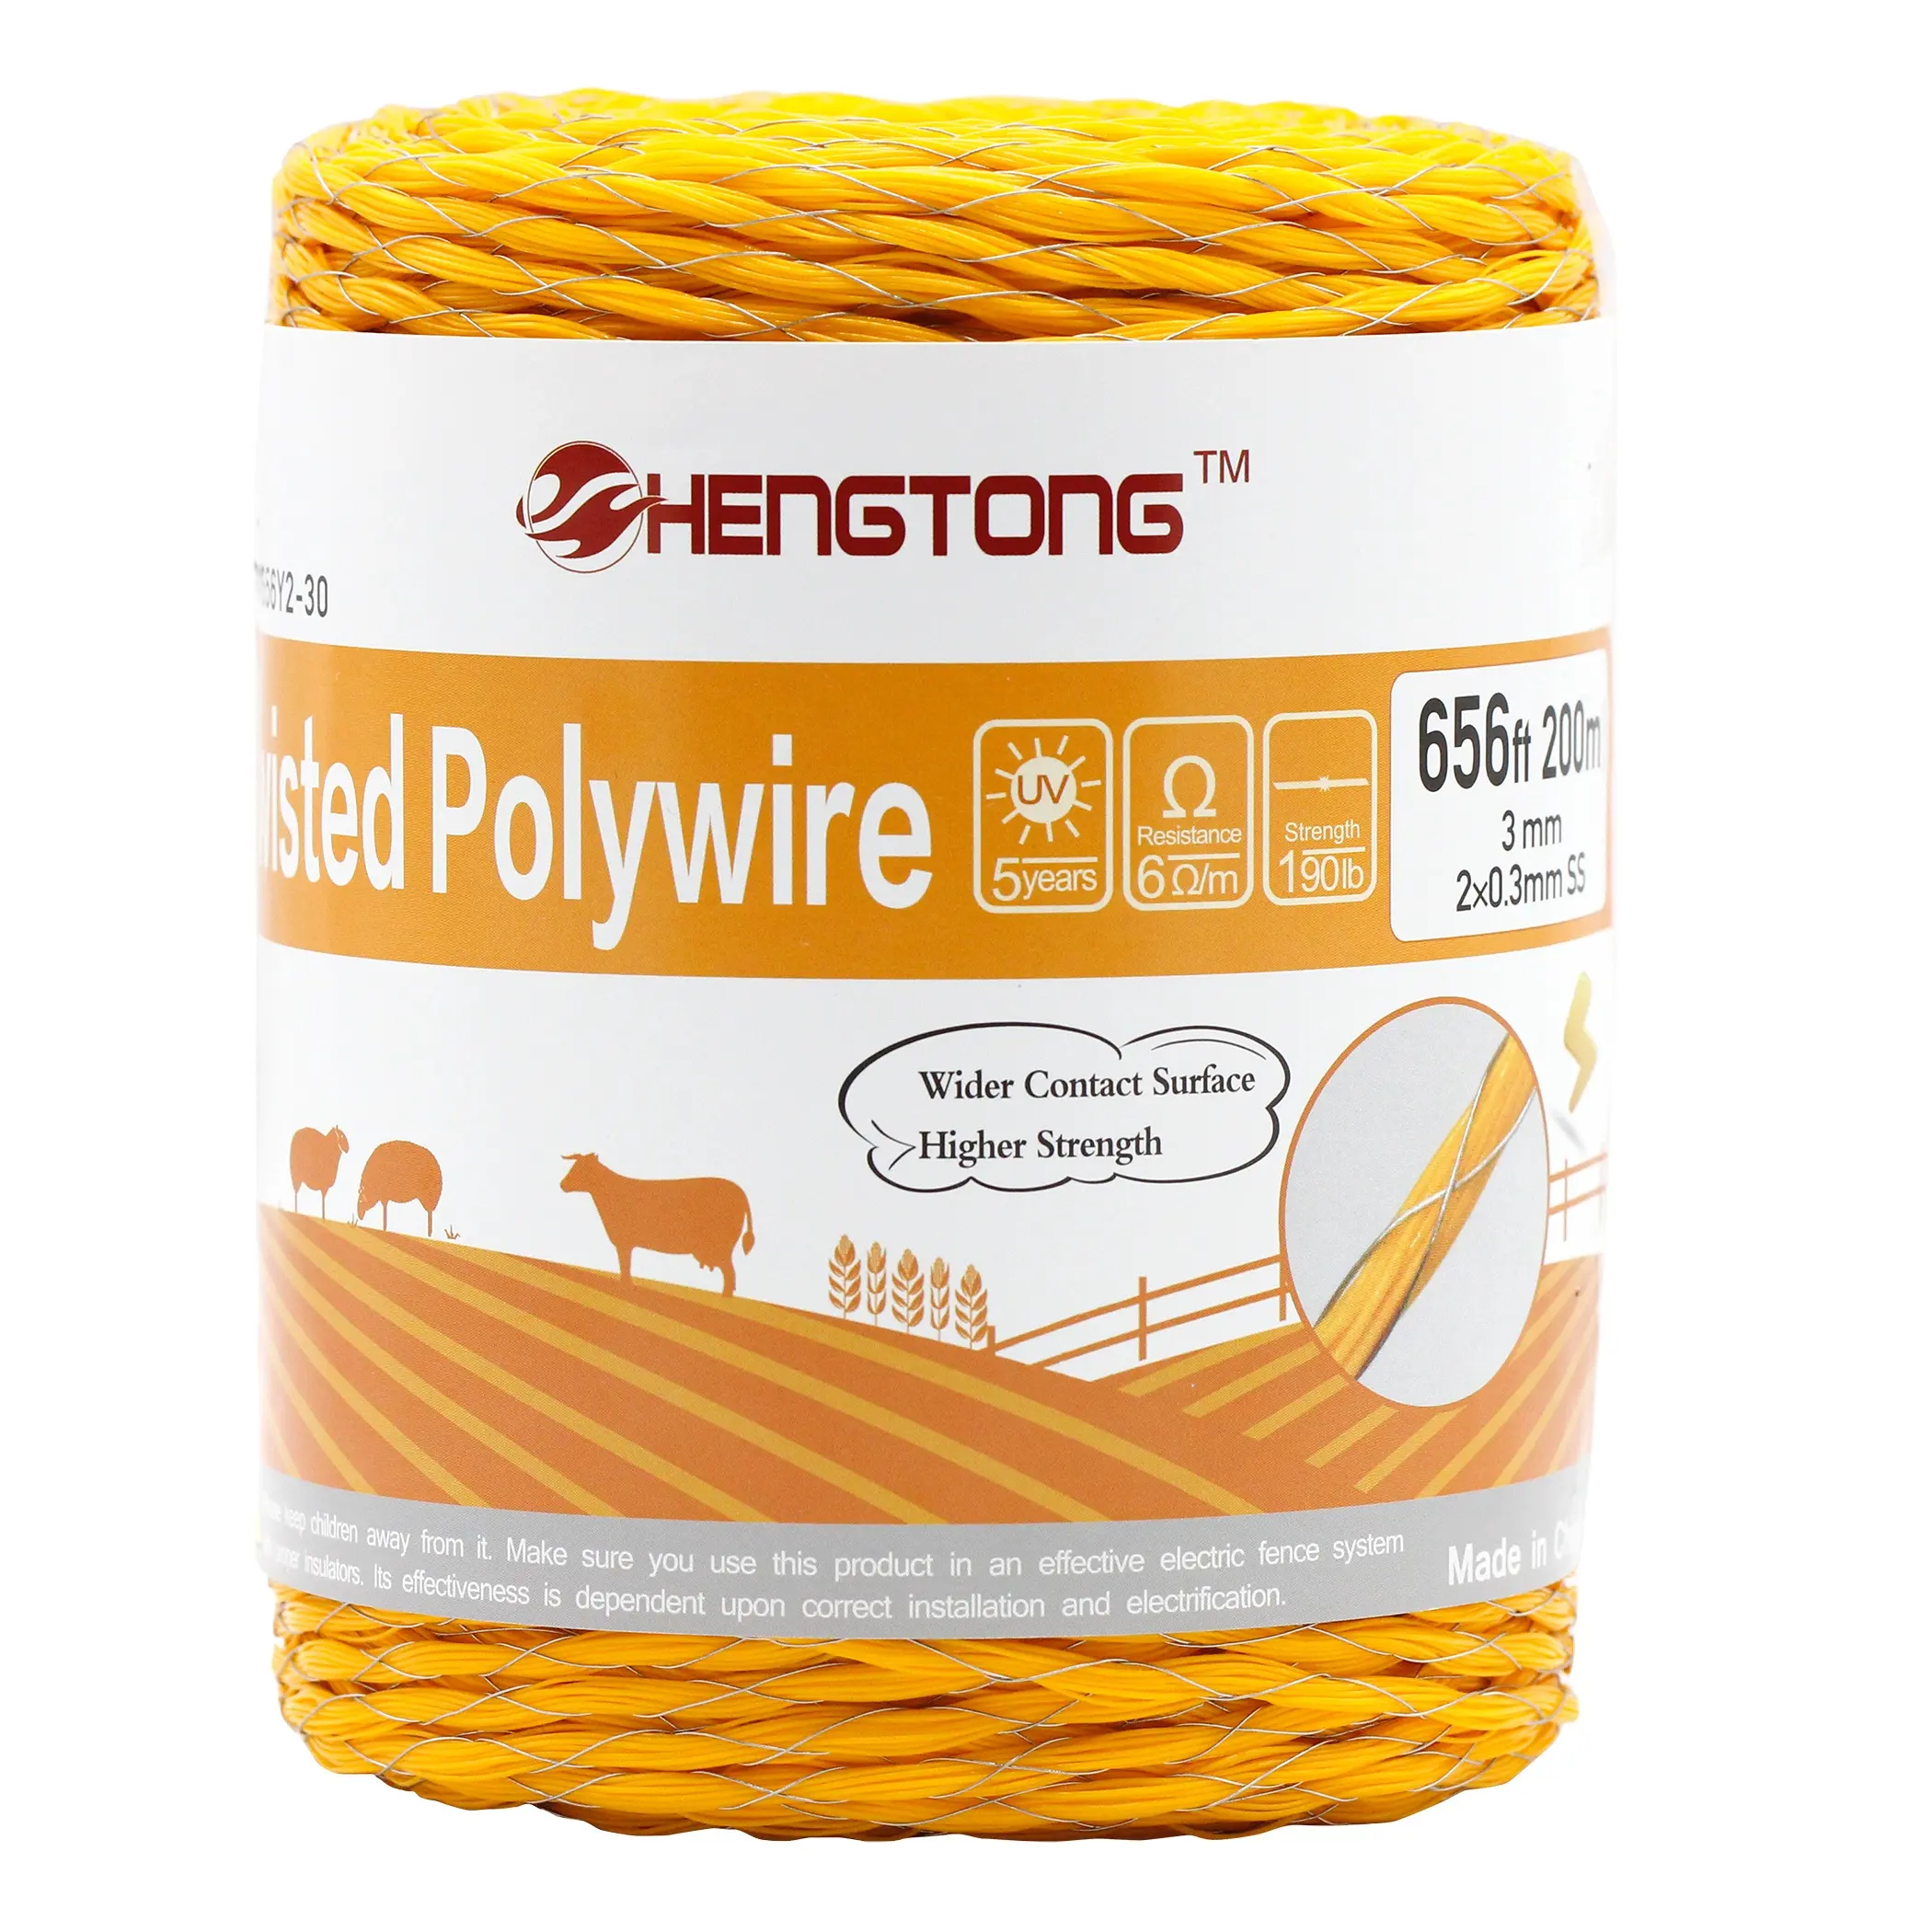 HENGTONG Electric Fence Twisted Poly Wire 656ft 200m, 2 x 0.3mm Stainless Steel Conductors